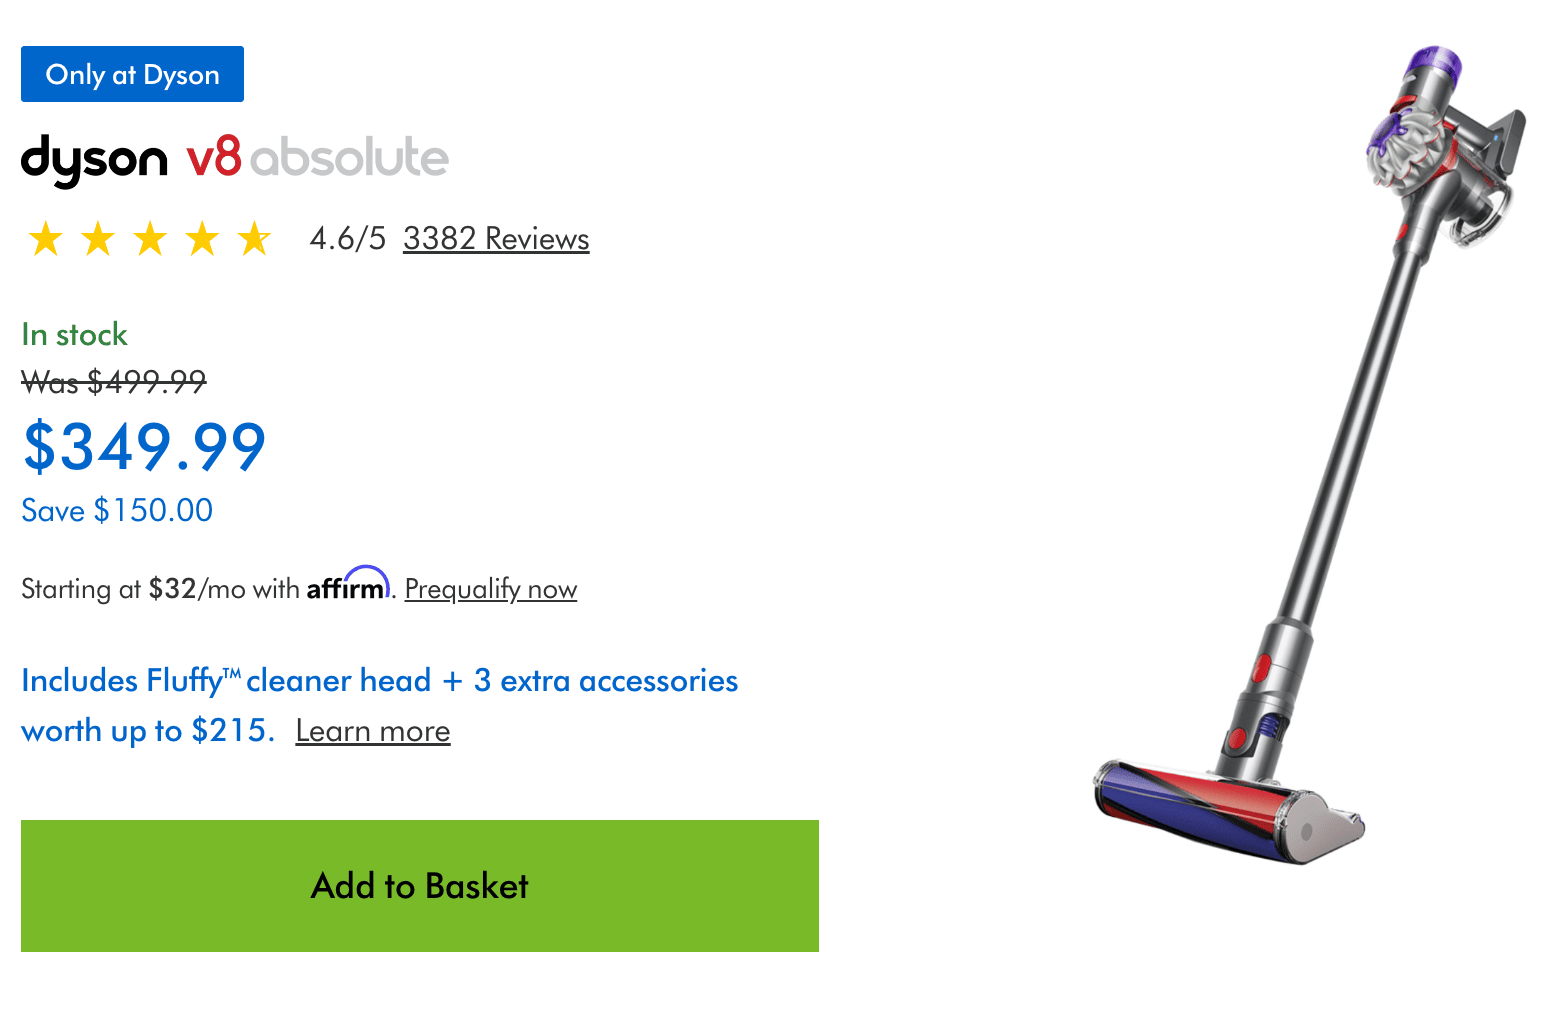 Dyson utilizes customer reviews on their product pages to justify pricing for e-commerce items.